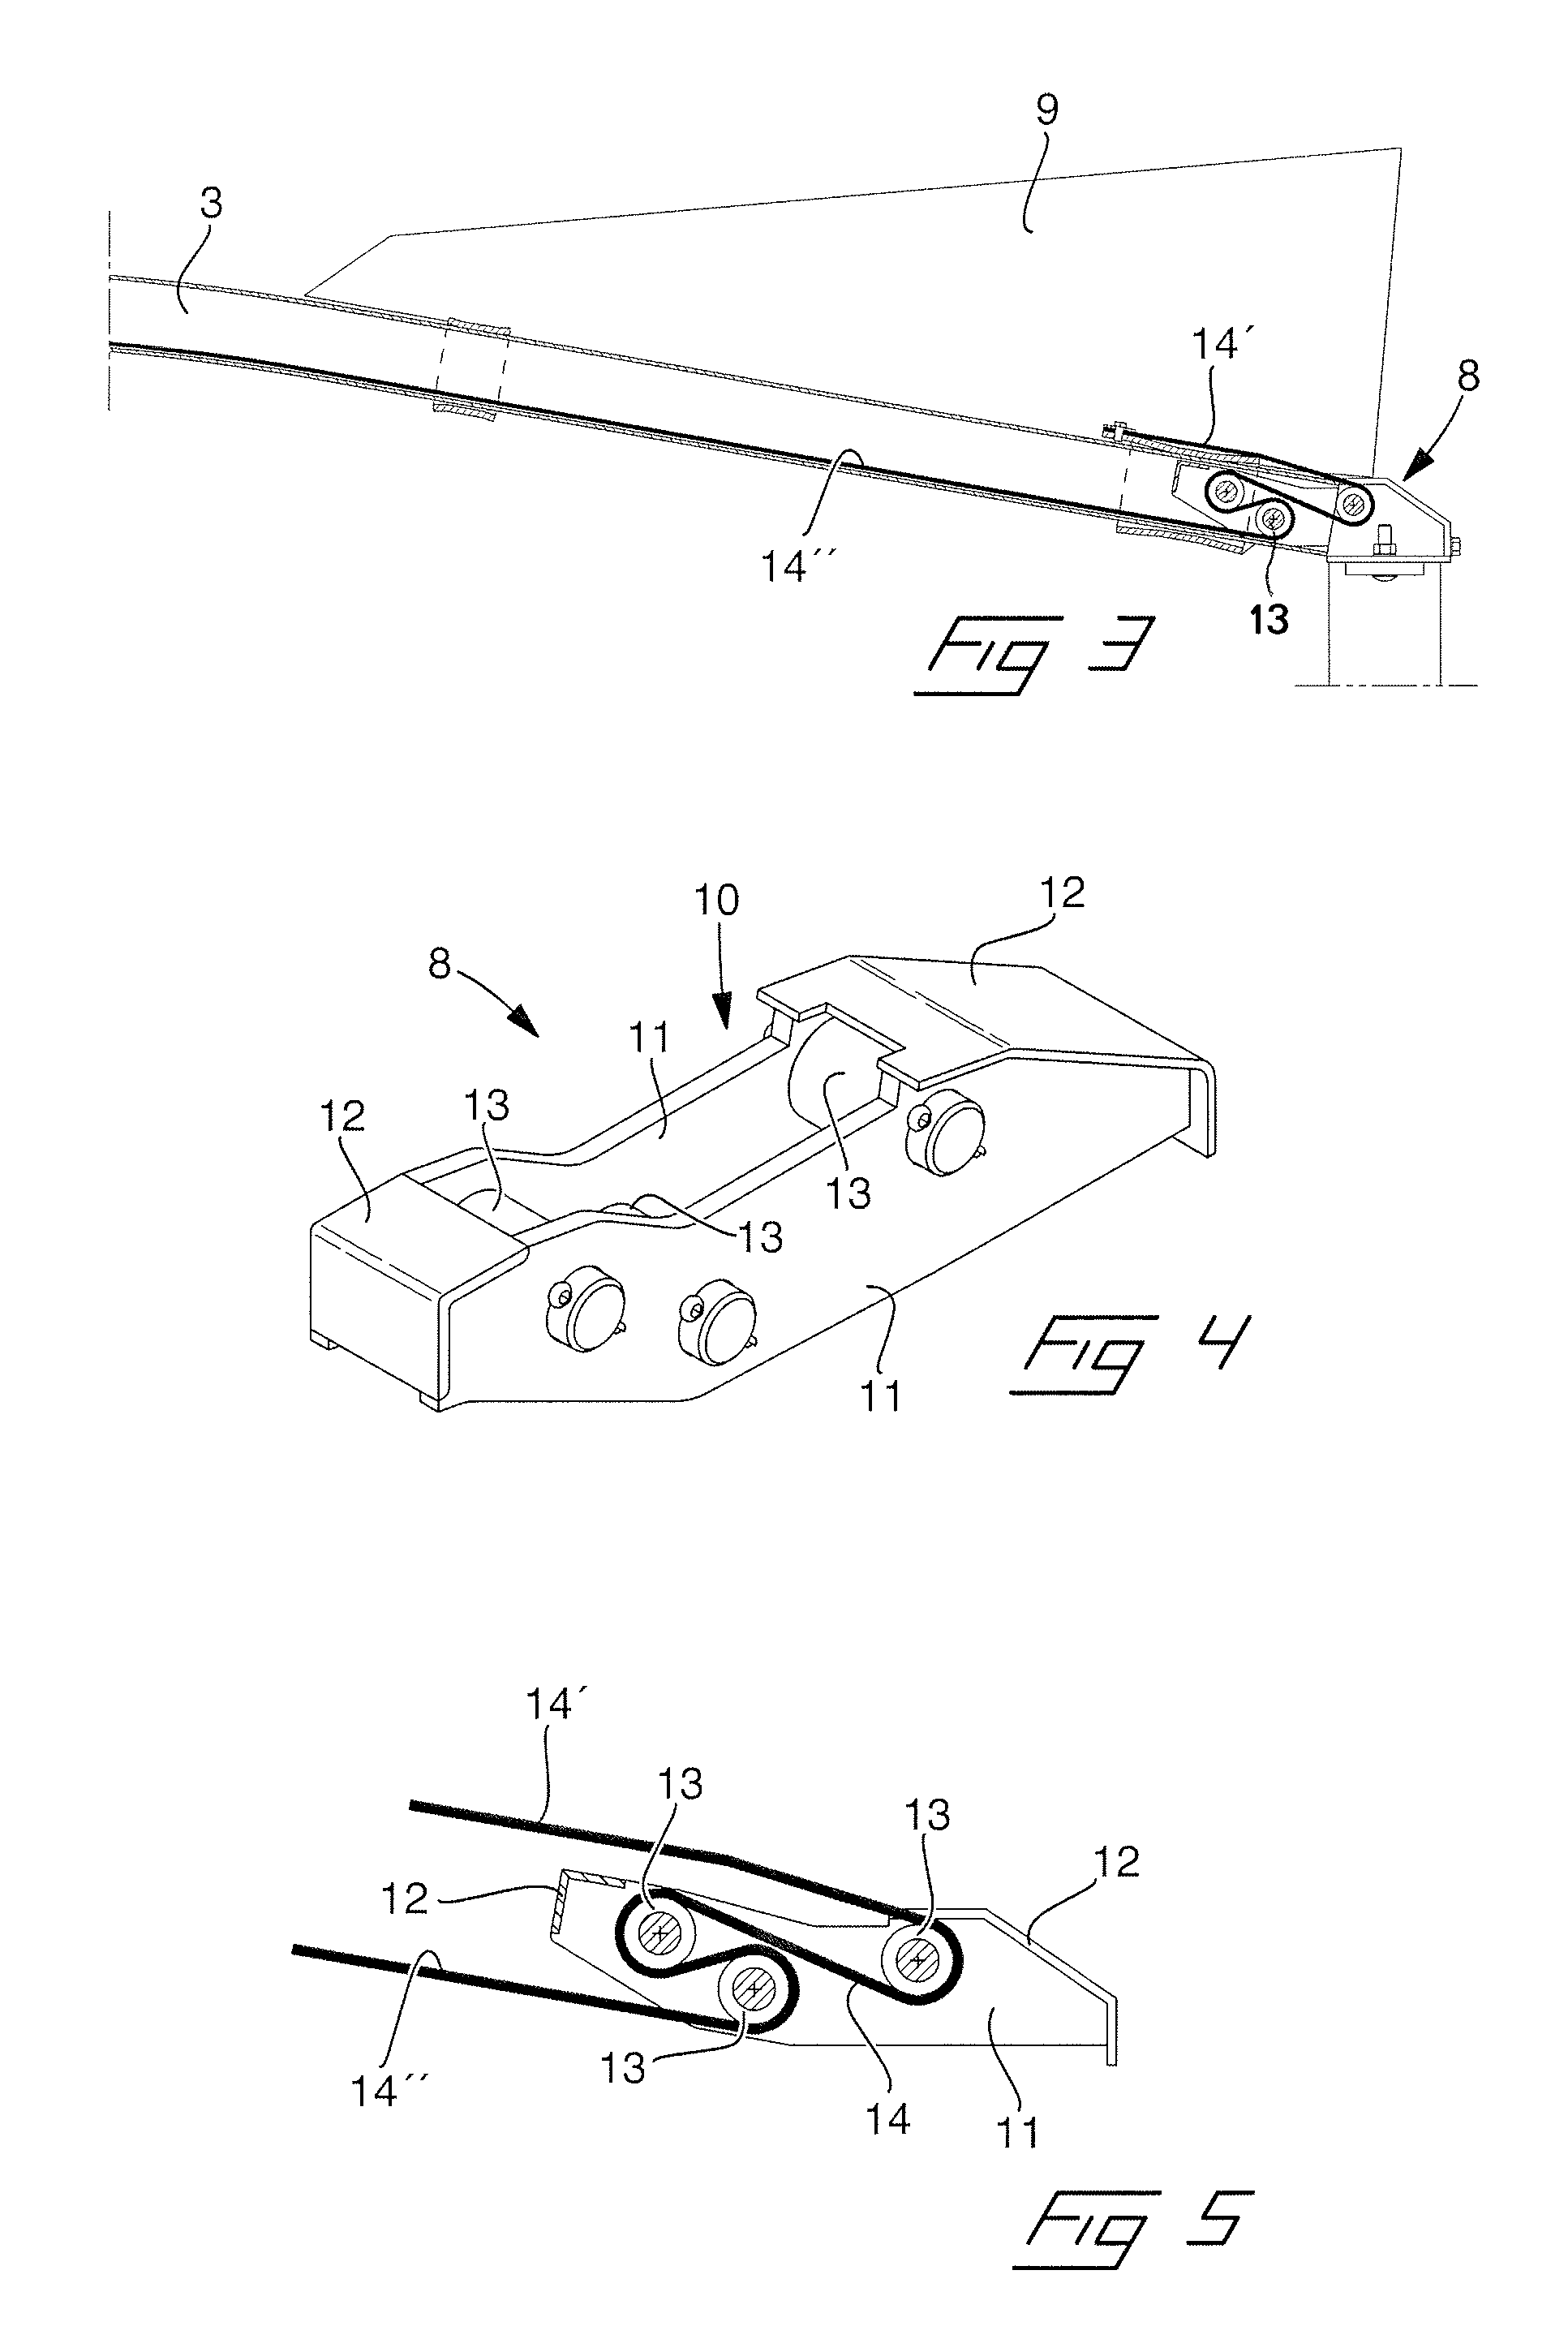 Impact attenuator for vehicles